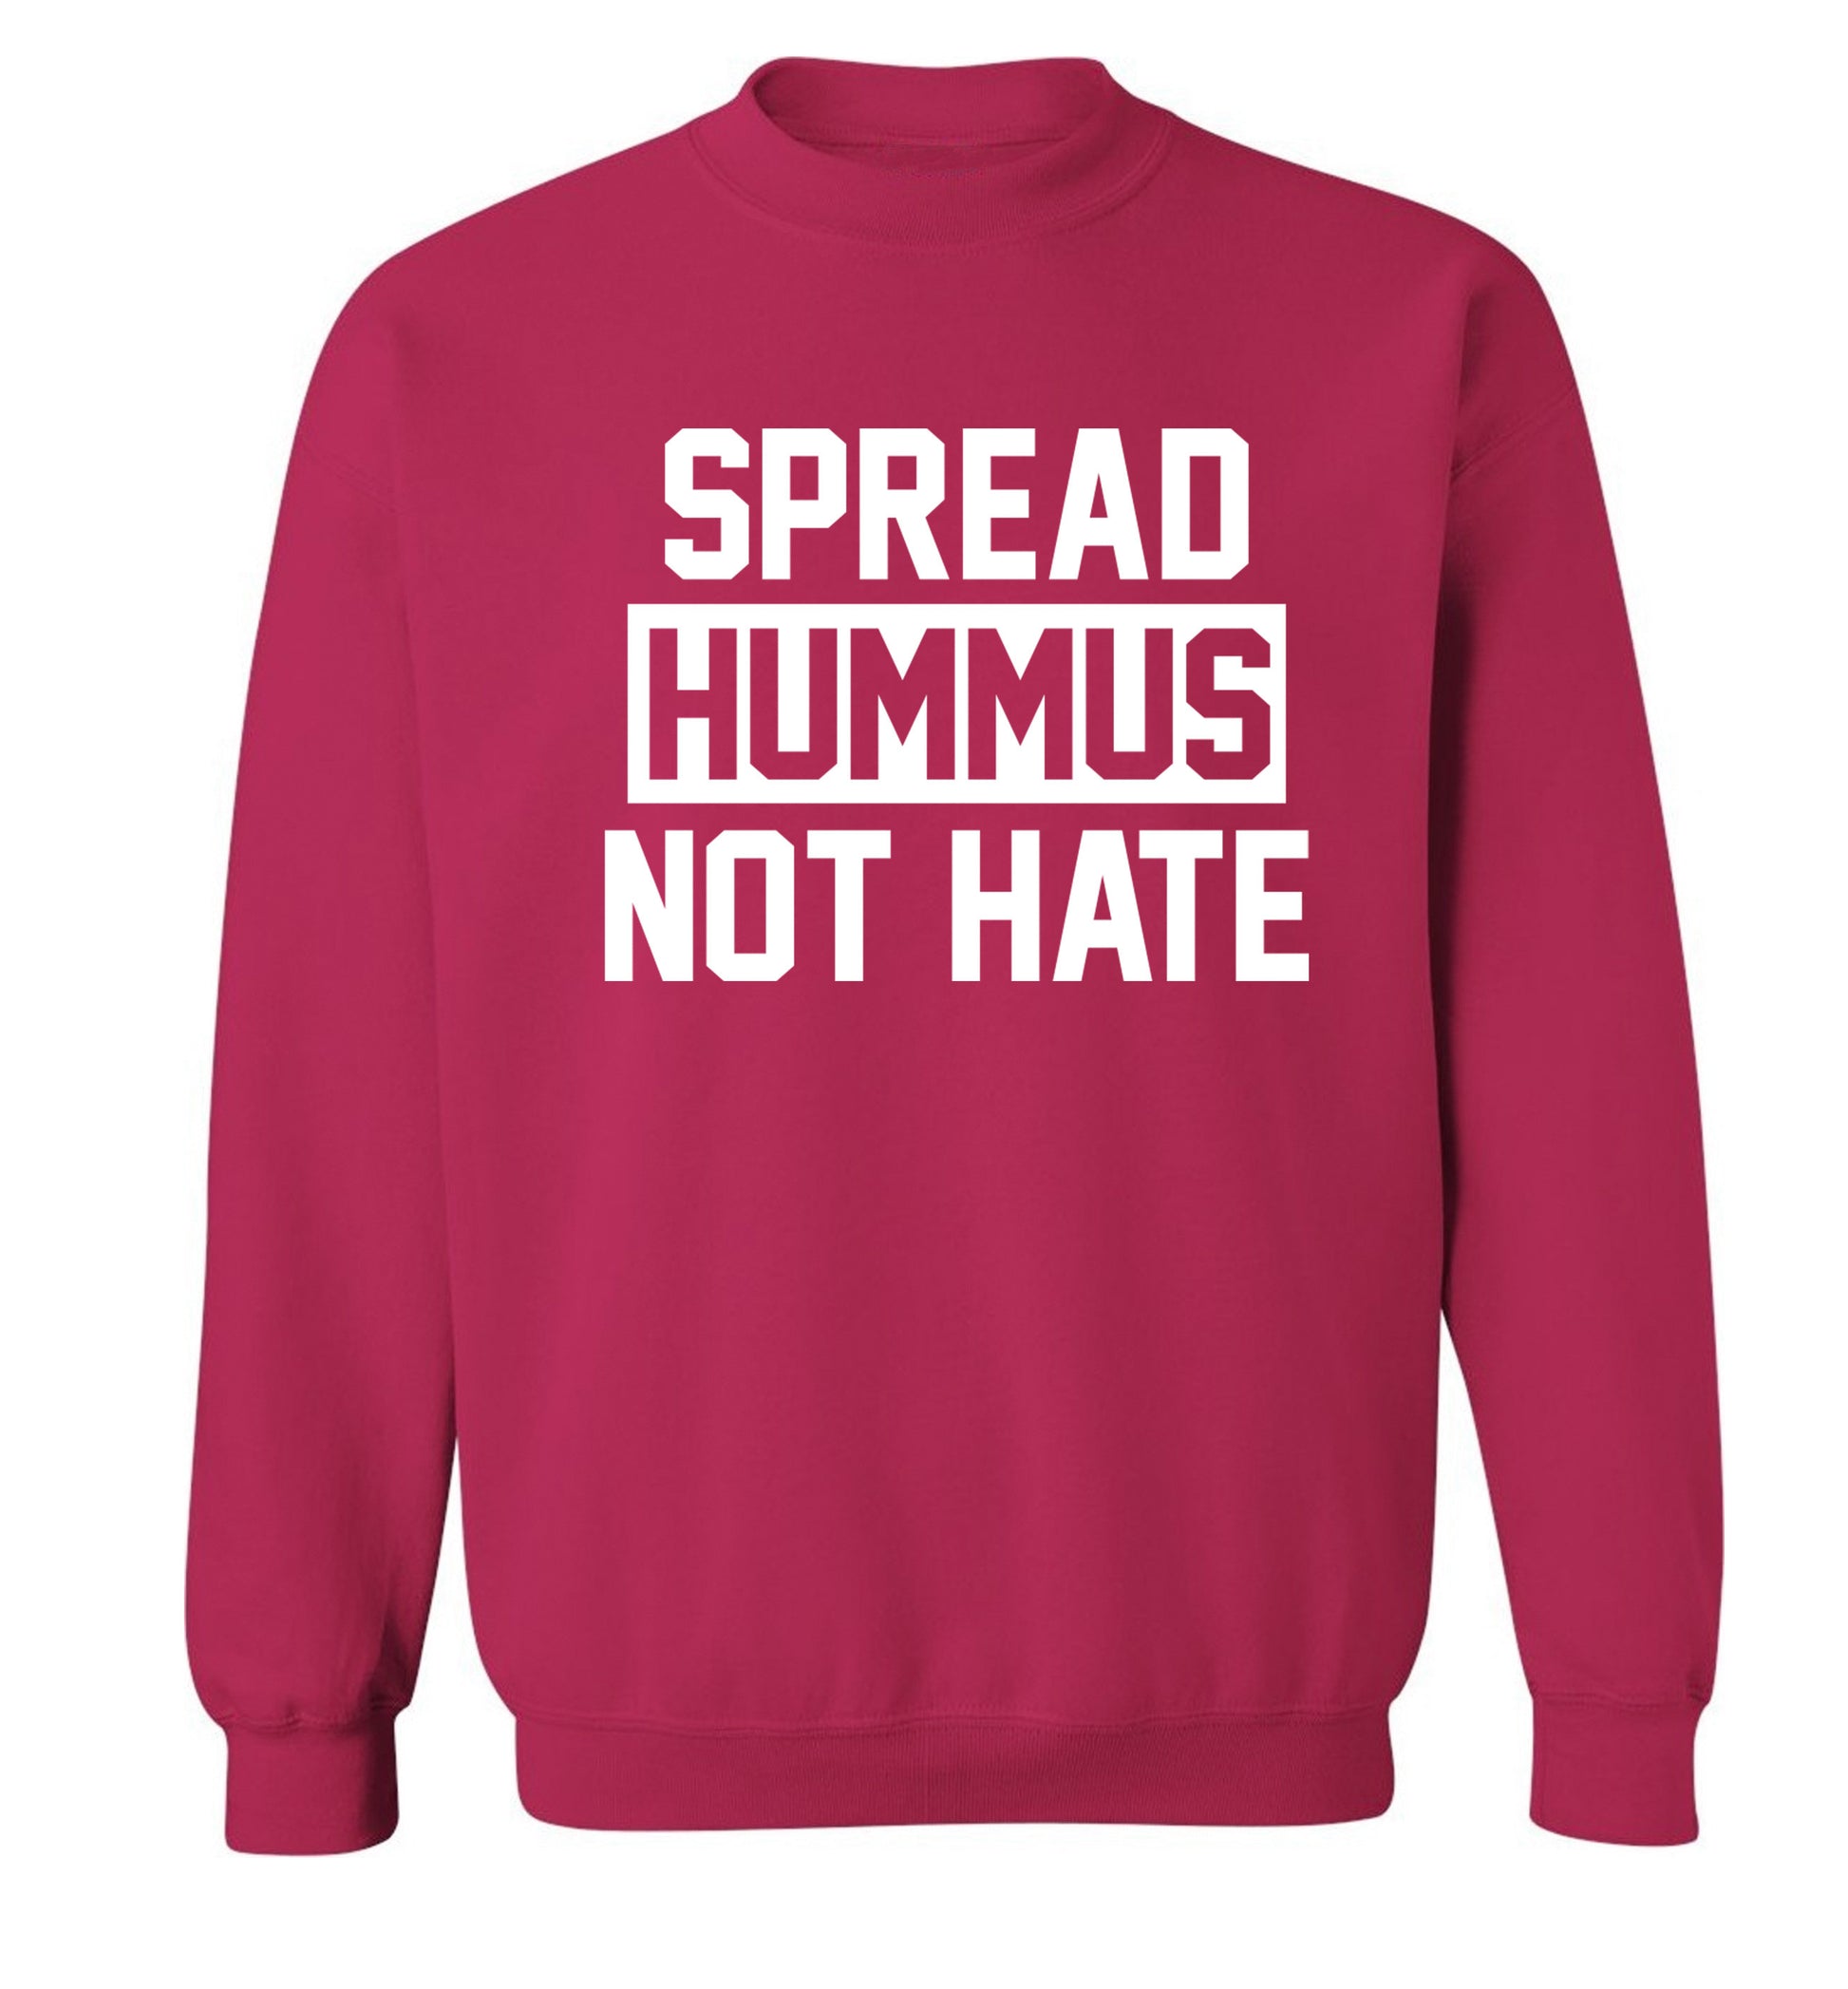 Spread hummus not hate Adult's unisex pink Sweater 2XL